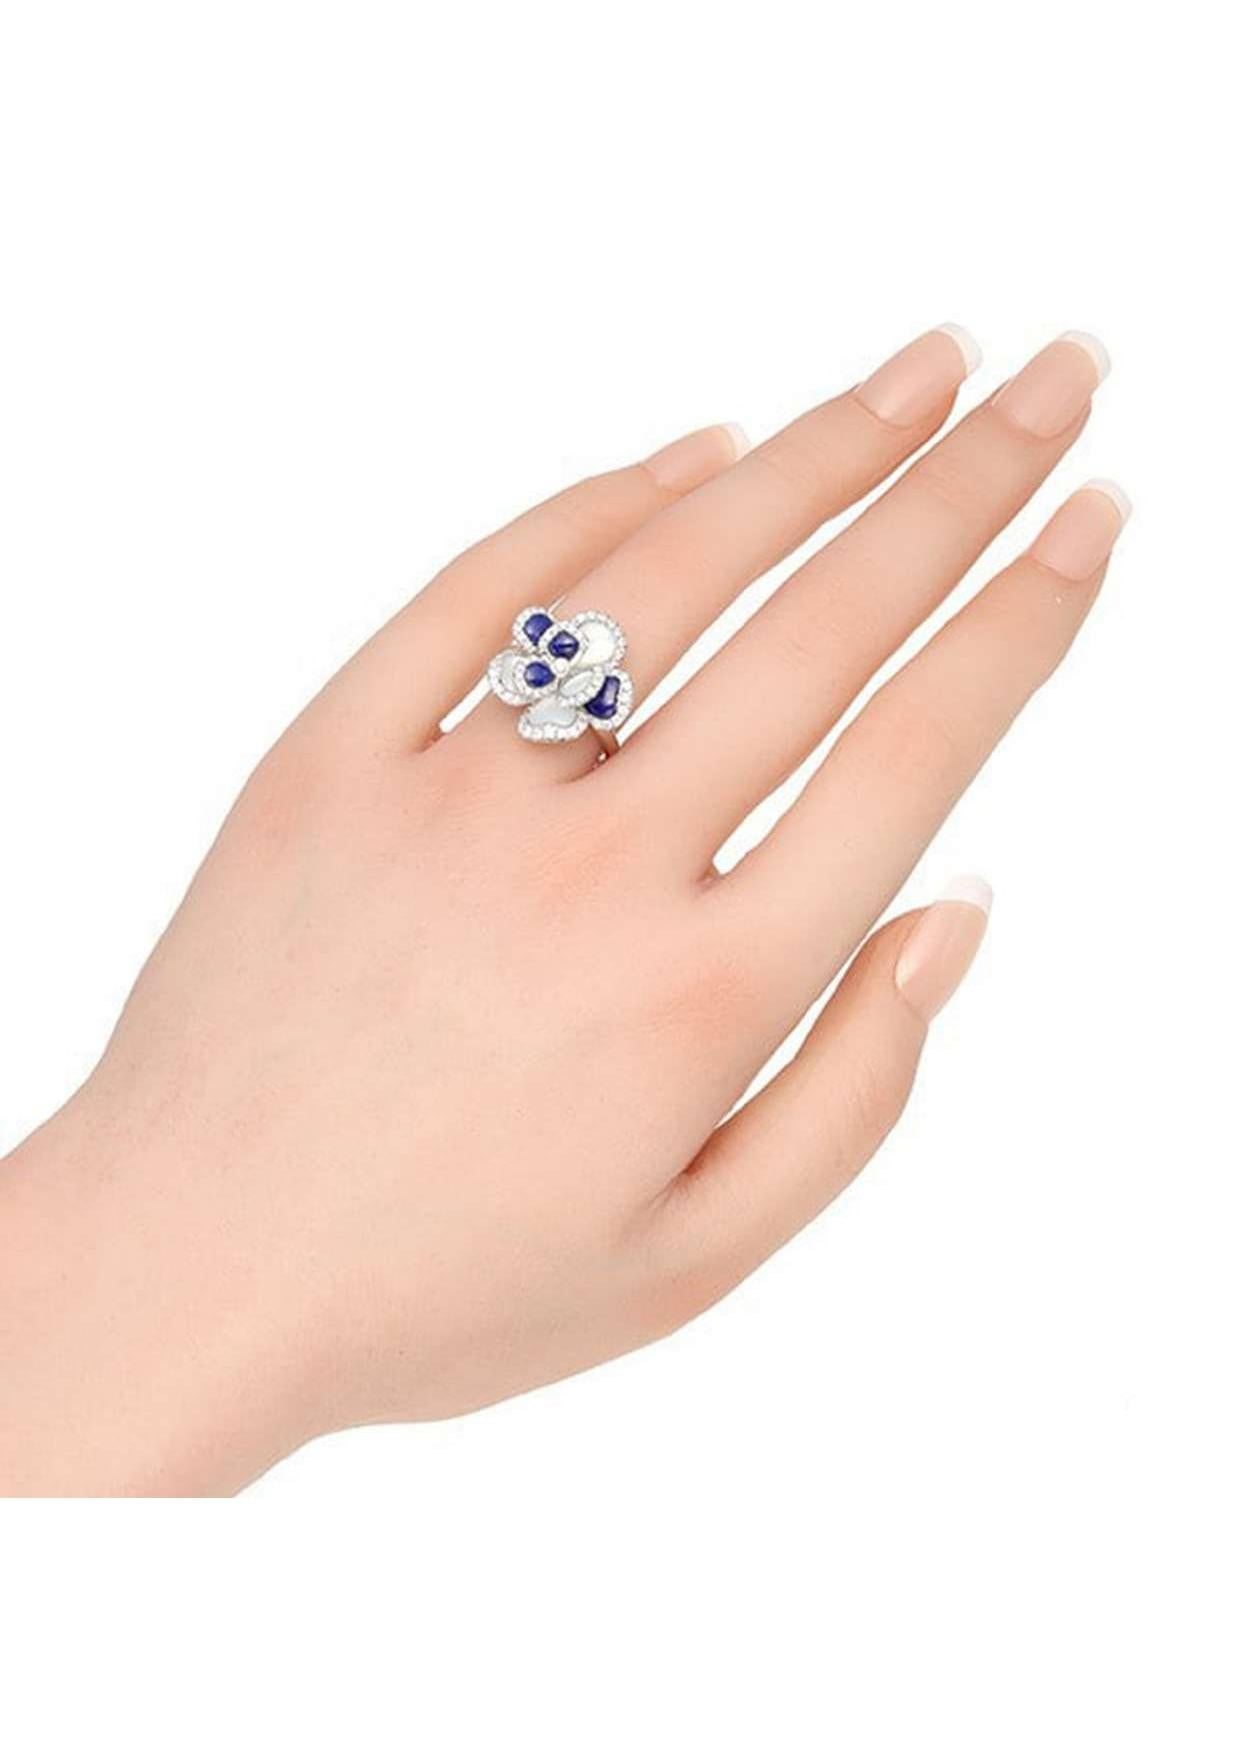 Round Cut 18K White Gold Lapis Lazuli Mother-of-Pearl Diamond Ring, Size 7.0 For Sale